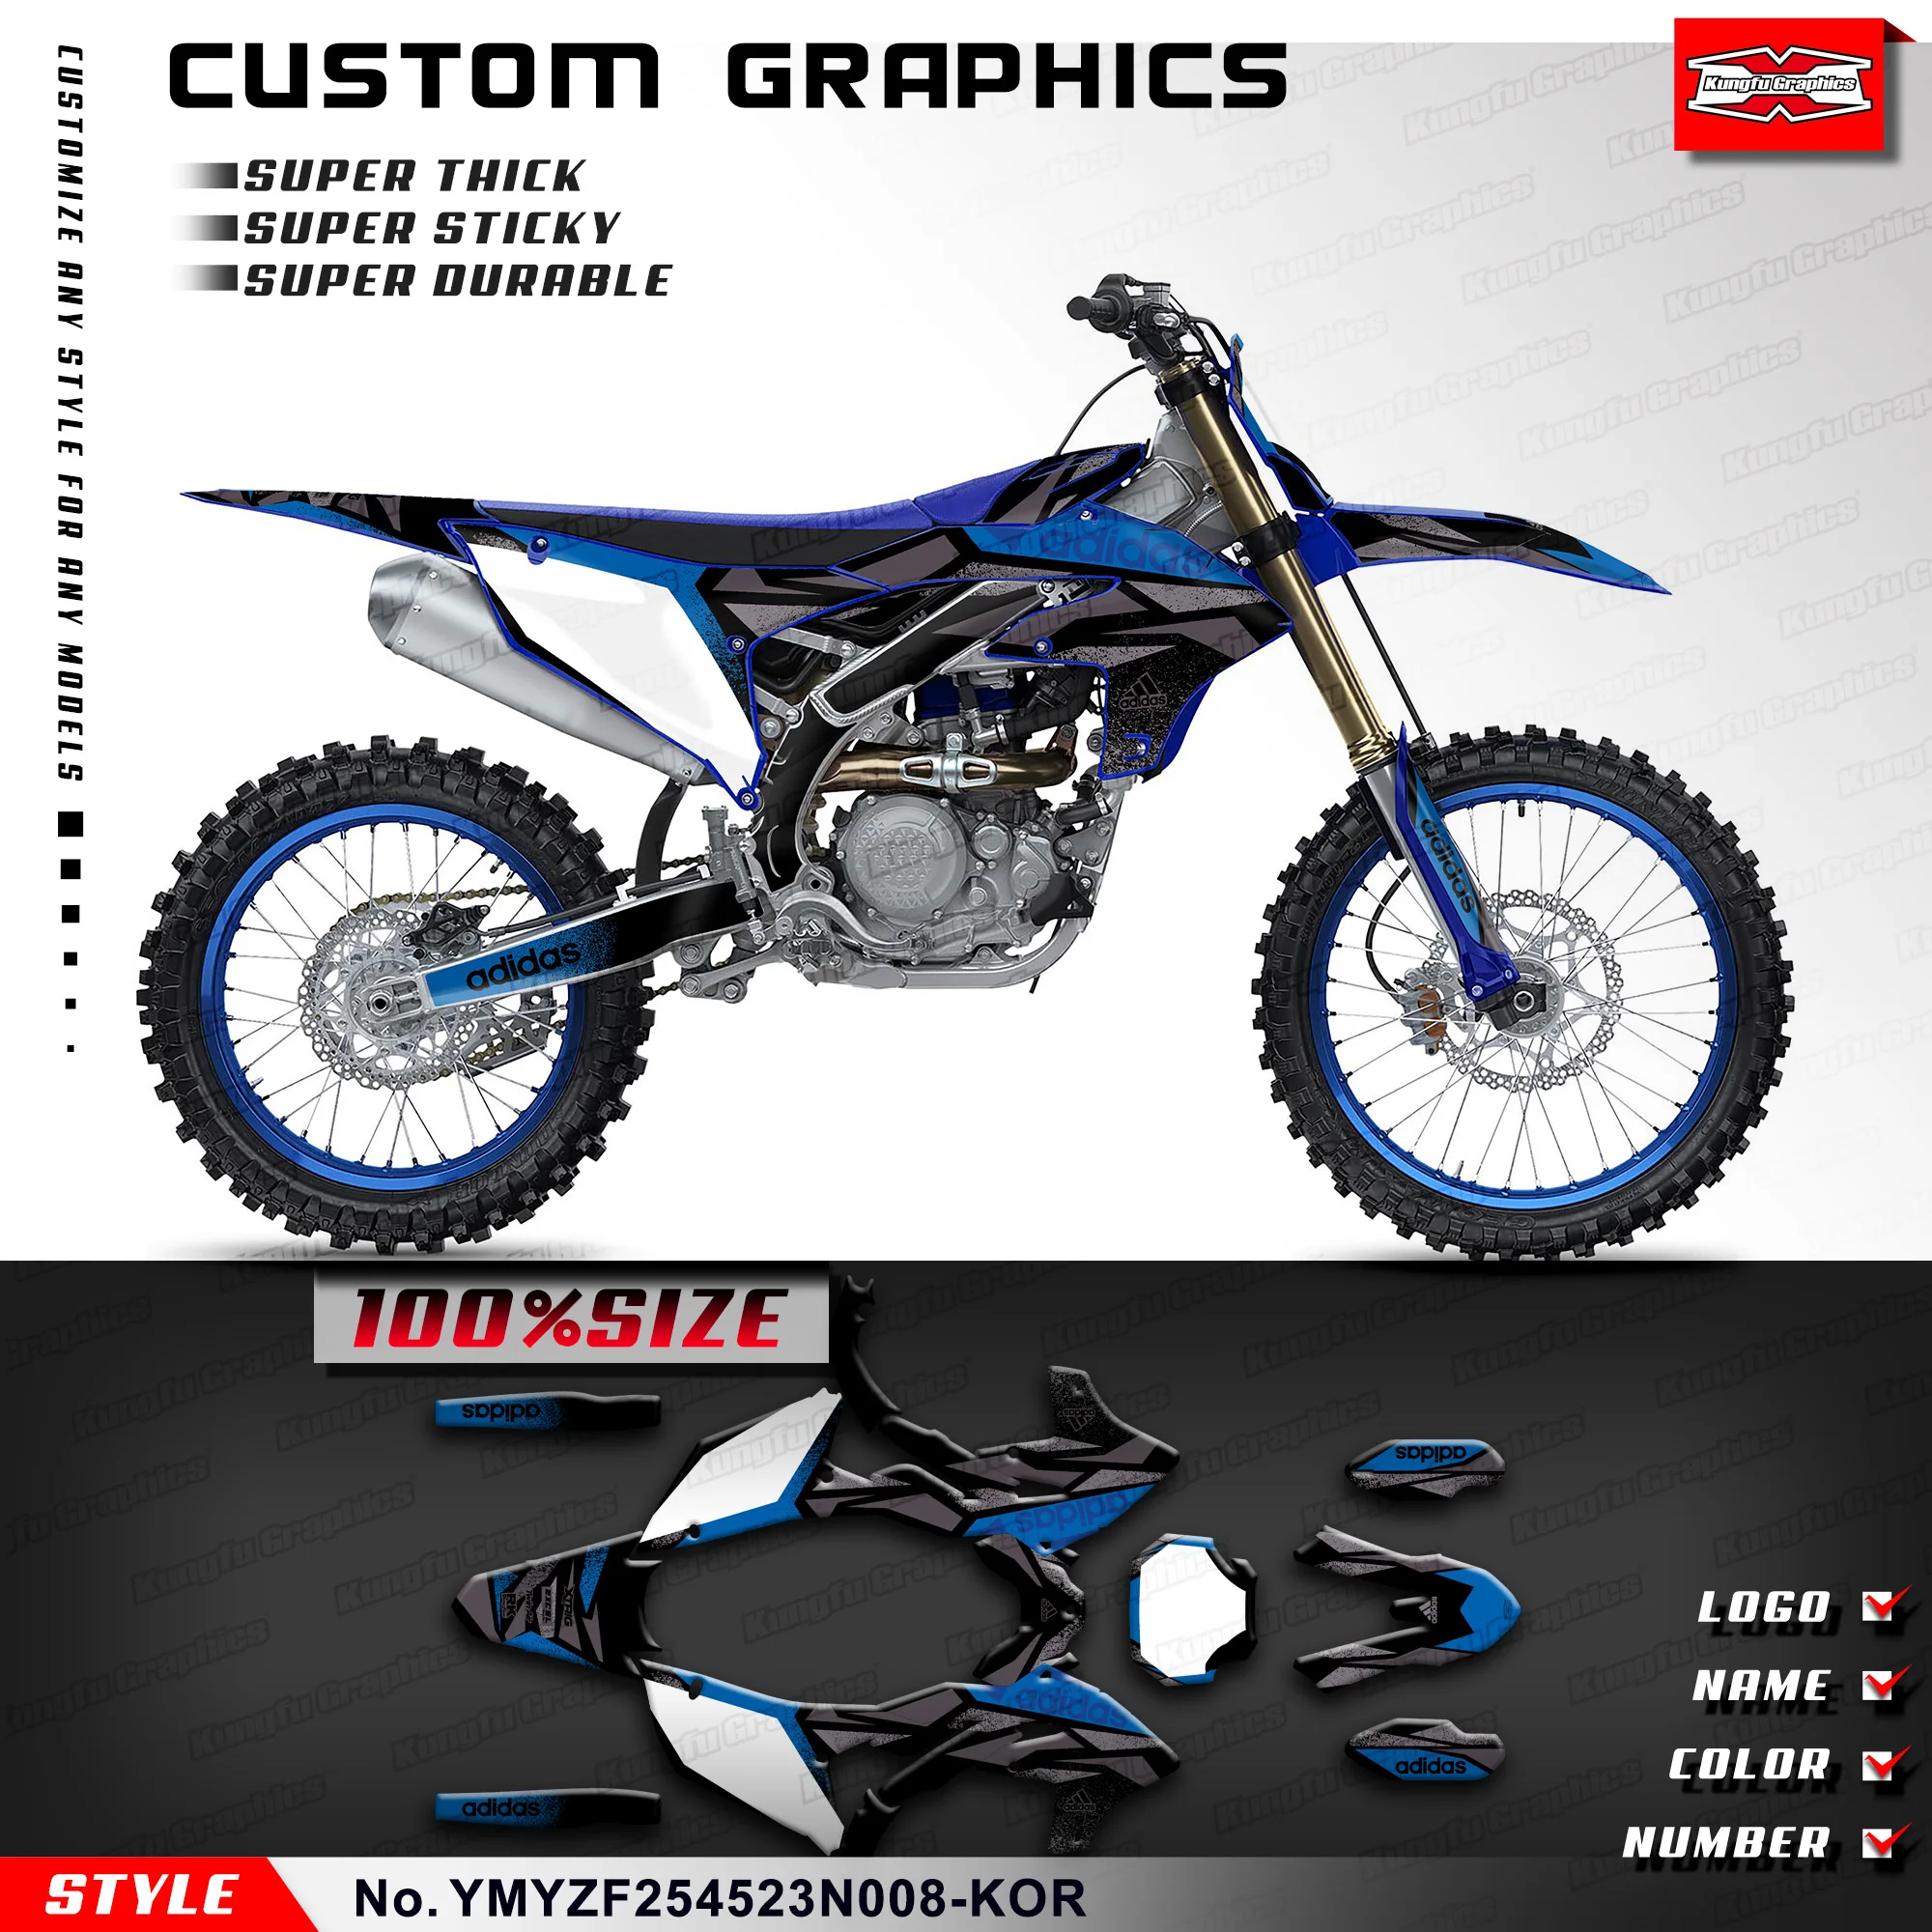 KUNGFU GRAPHICS Custom Dirt Bike Decals Waterproof Stickers Kit for Yamaha YZ450F YZF450 YZ450FX YZ250F 2023 2024 kungfu graphics custom decals waterproof stickers kit for sur ron ultra bee surron grey